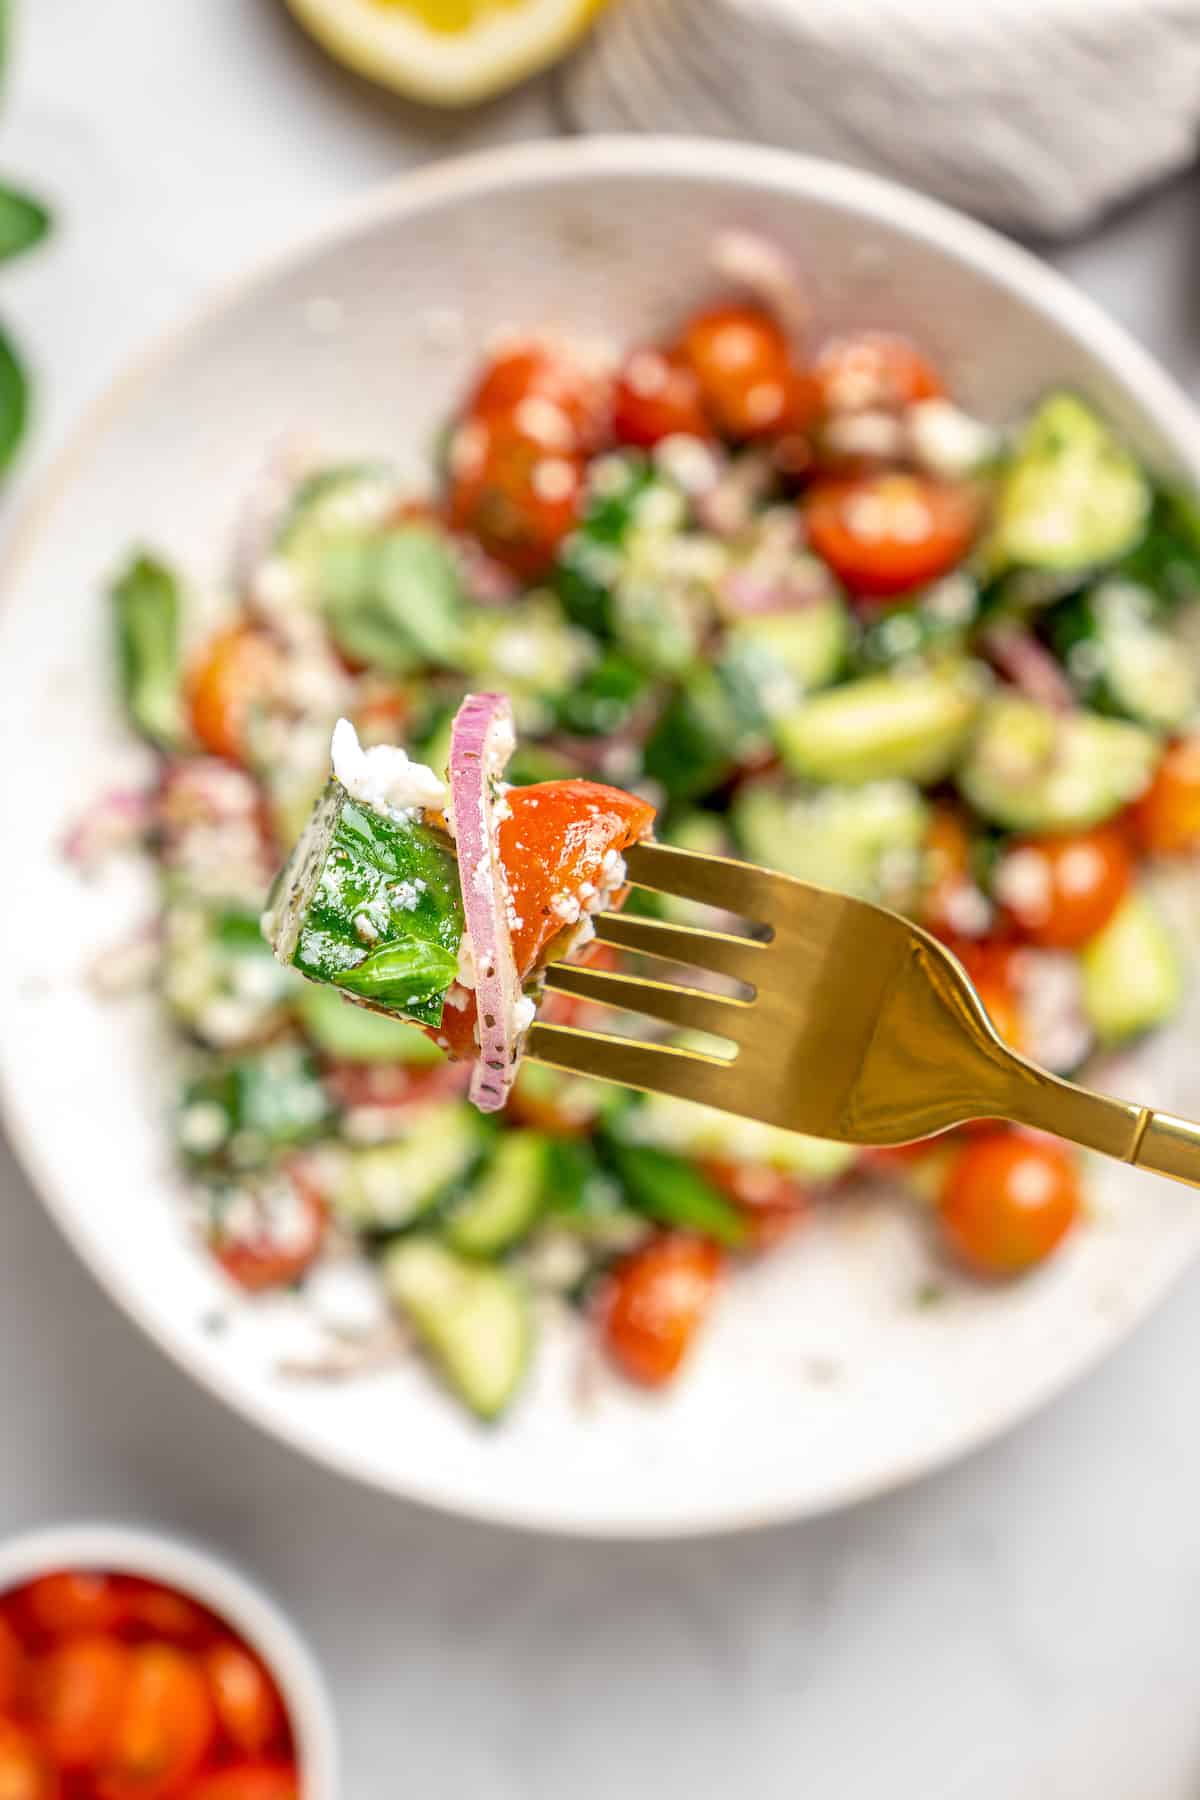 Cucumber and tomato salad on fork, held above bowl of salad